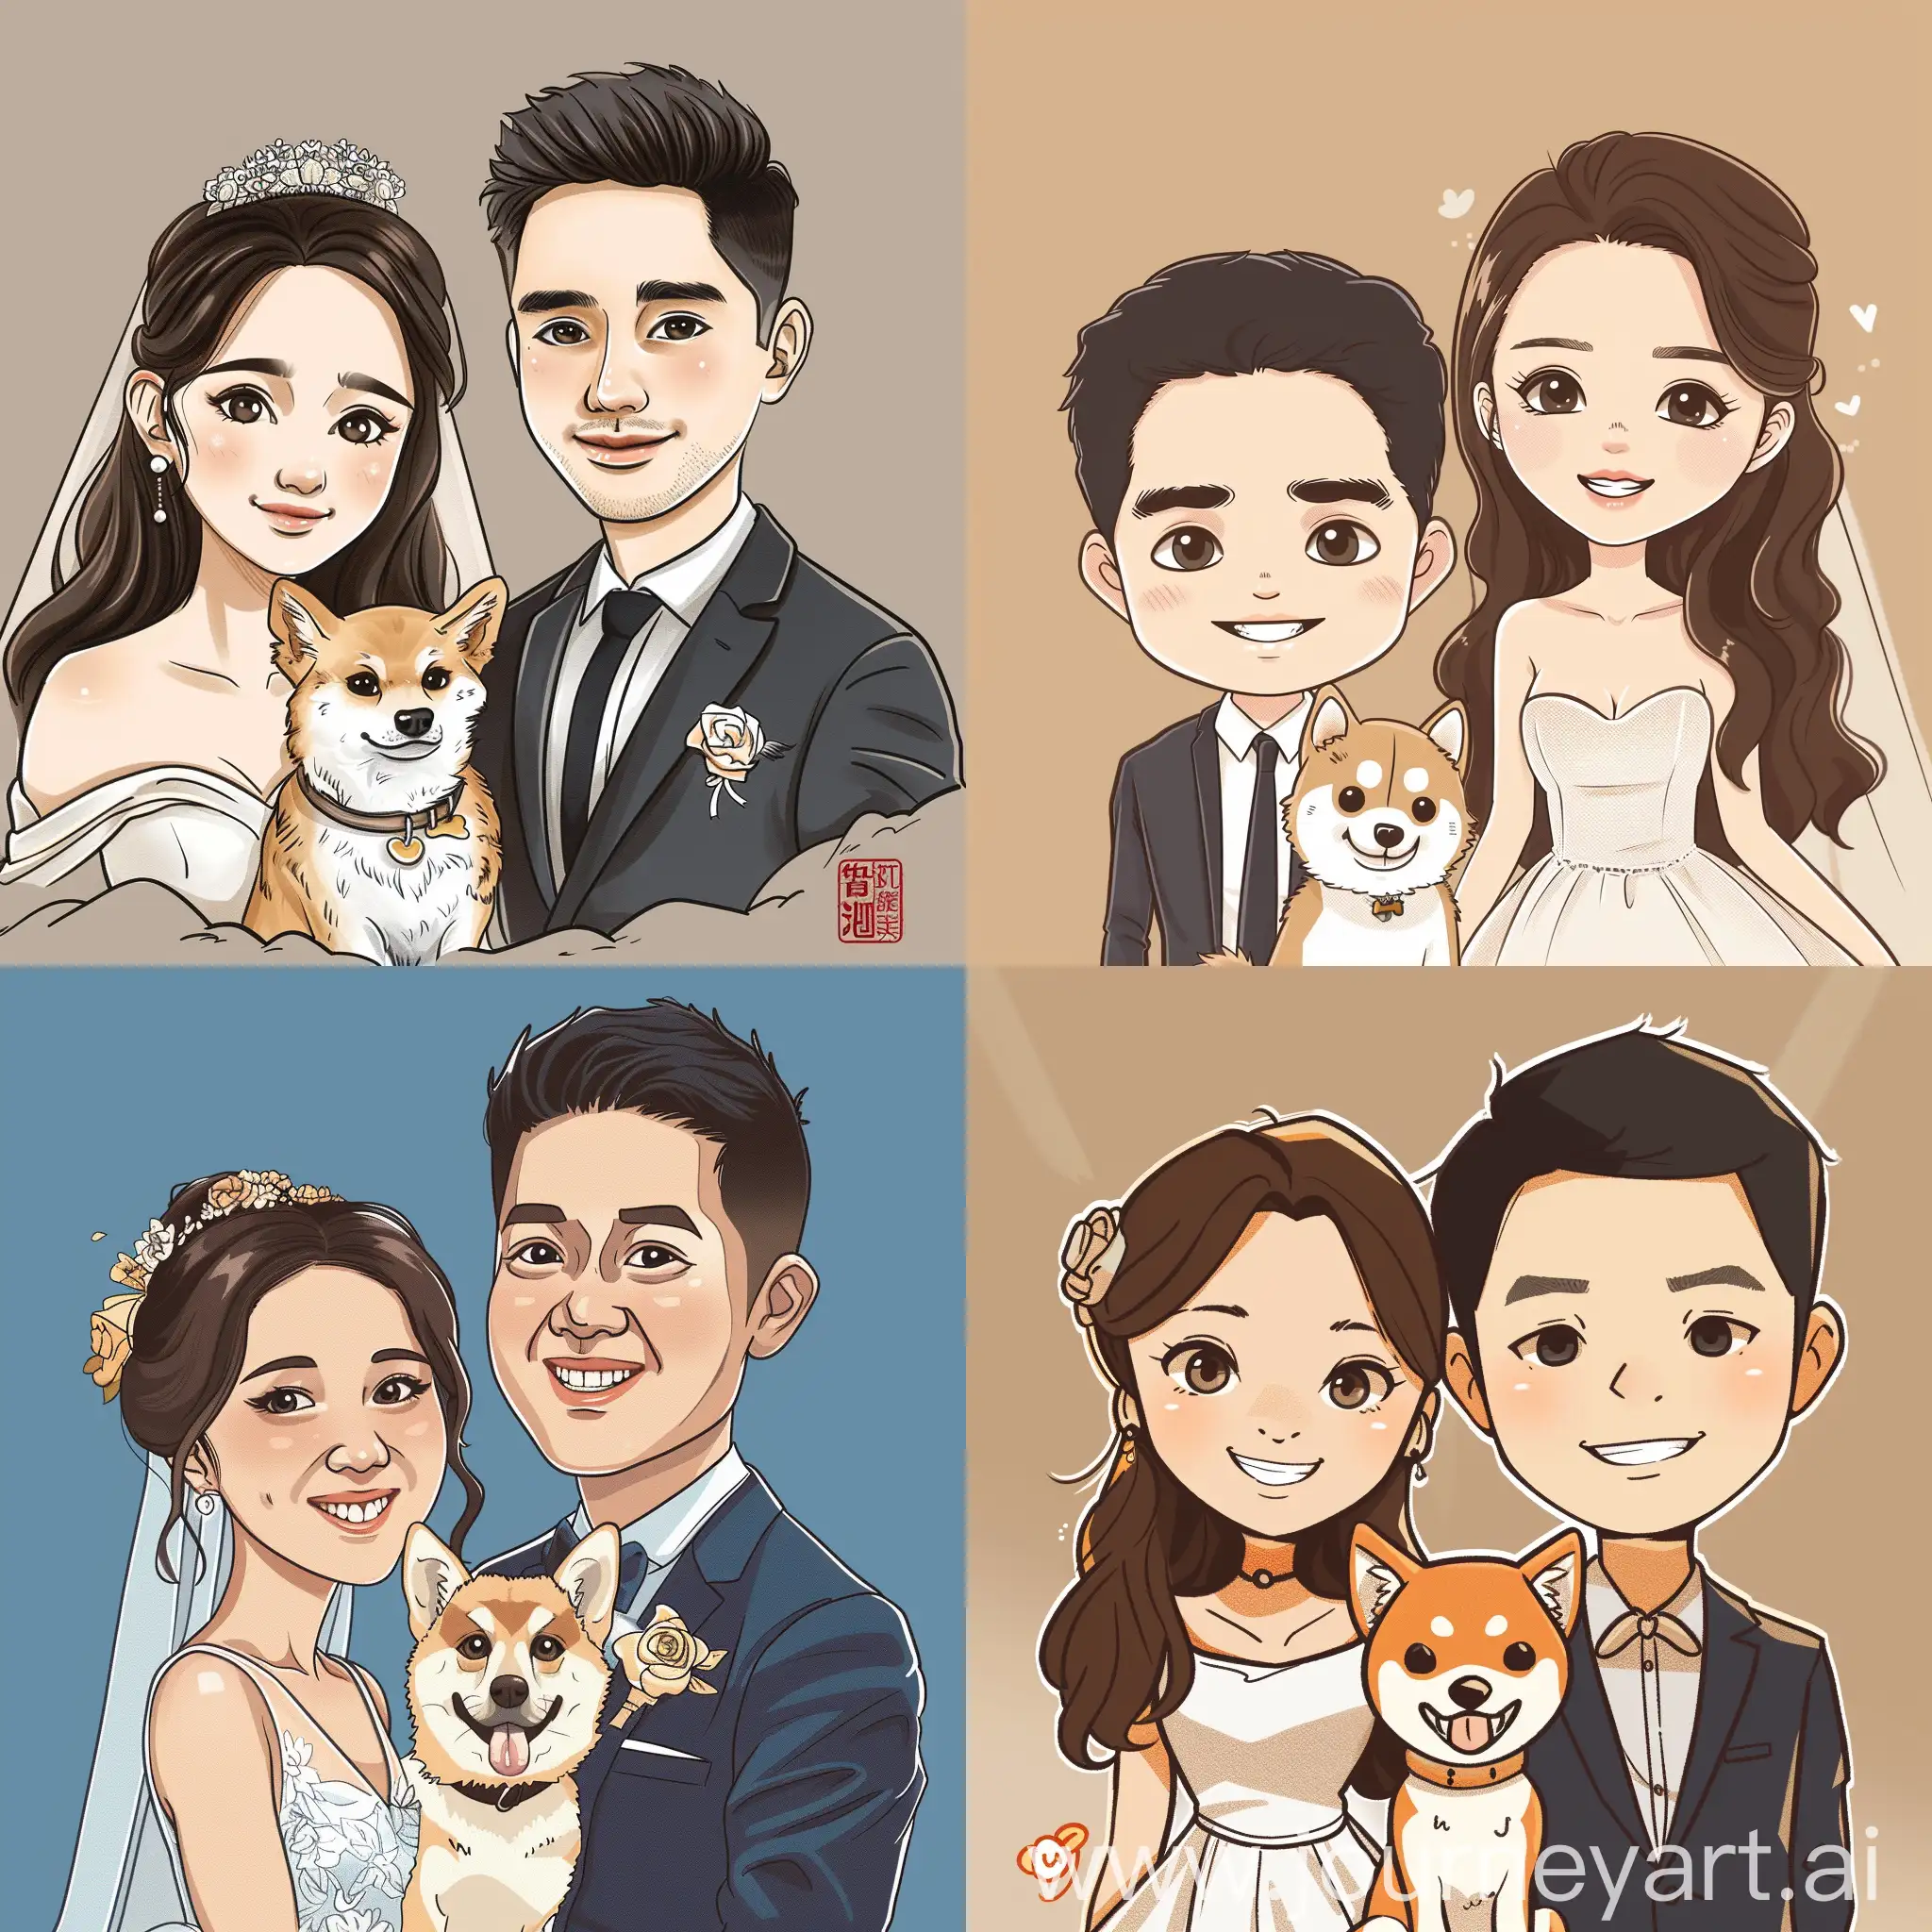 can you generate a cartoon with simple drawing or sketches of me and my husband in wedding dress and our shiba dog. We are both young Chinese. We want to put a family thumbnail to our wedding card. Thank you.